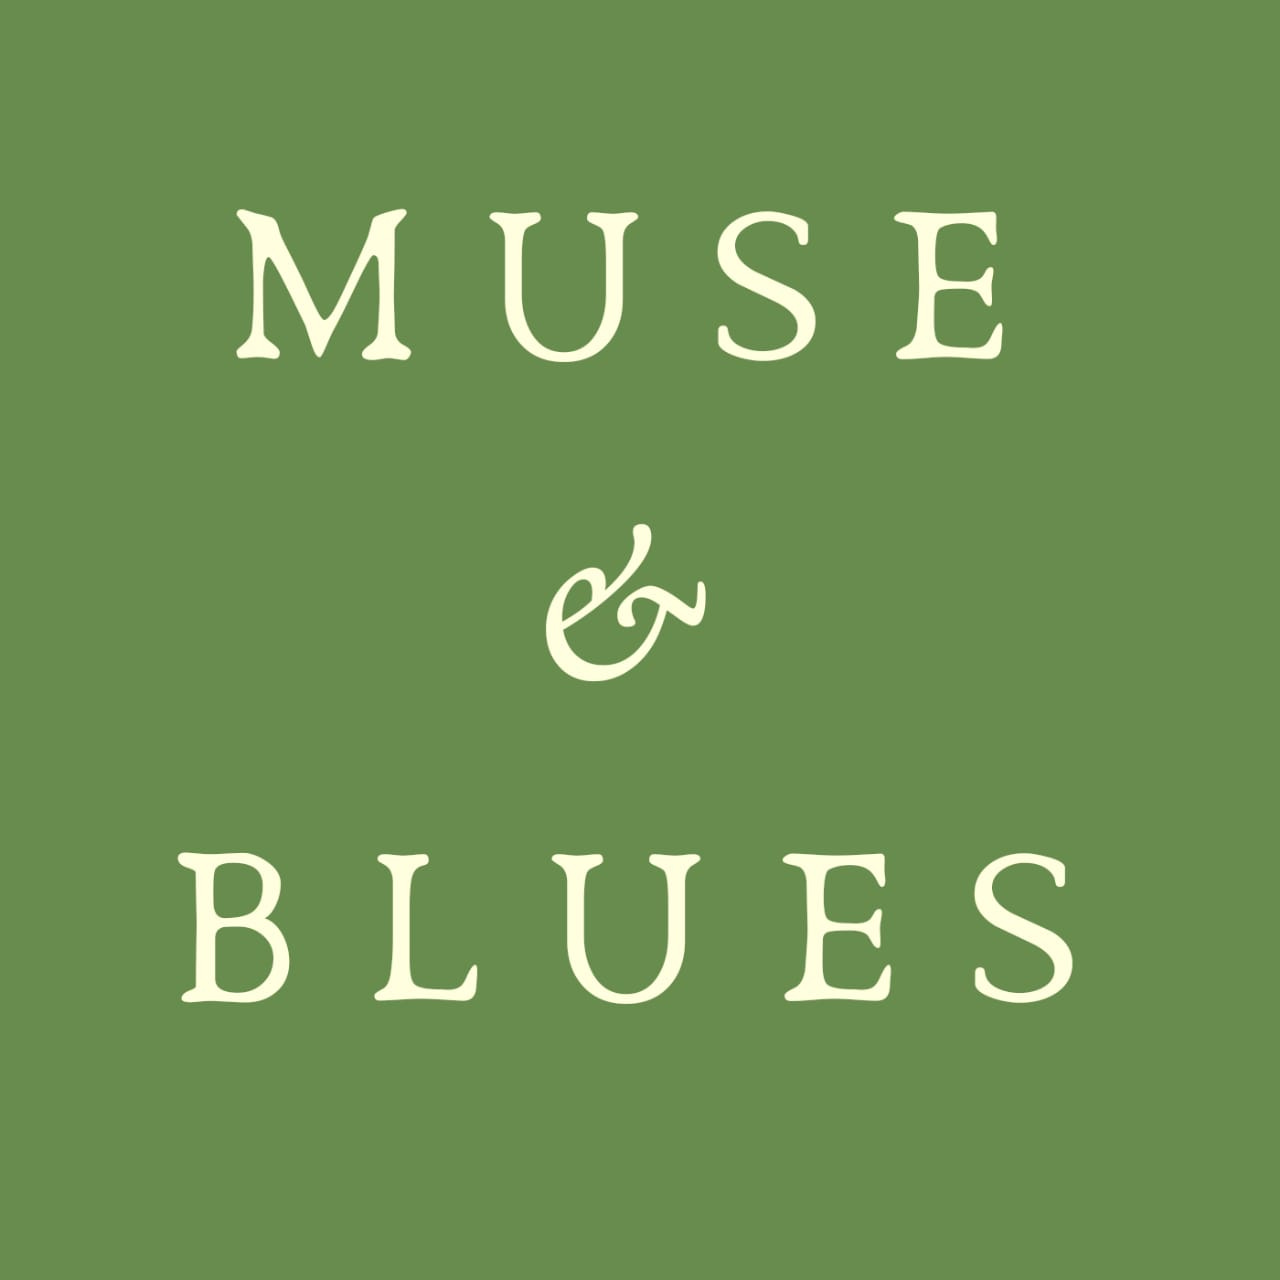 Artwork for muse & blues